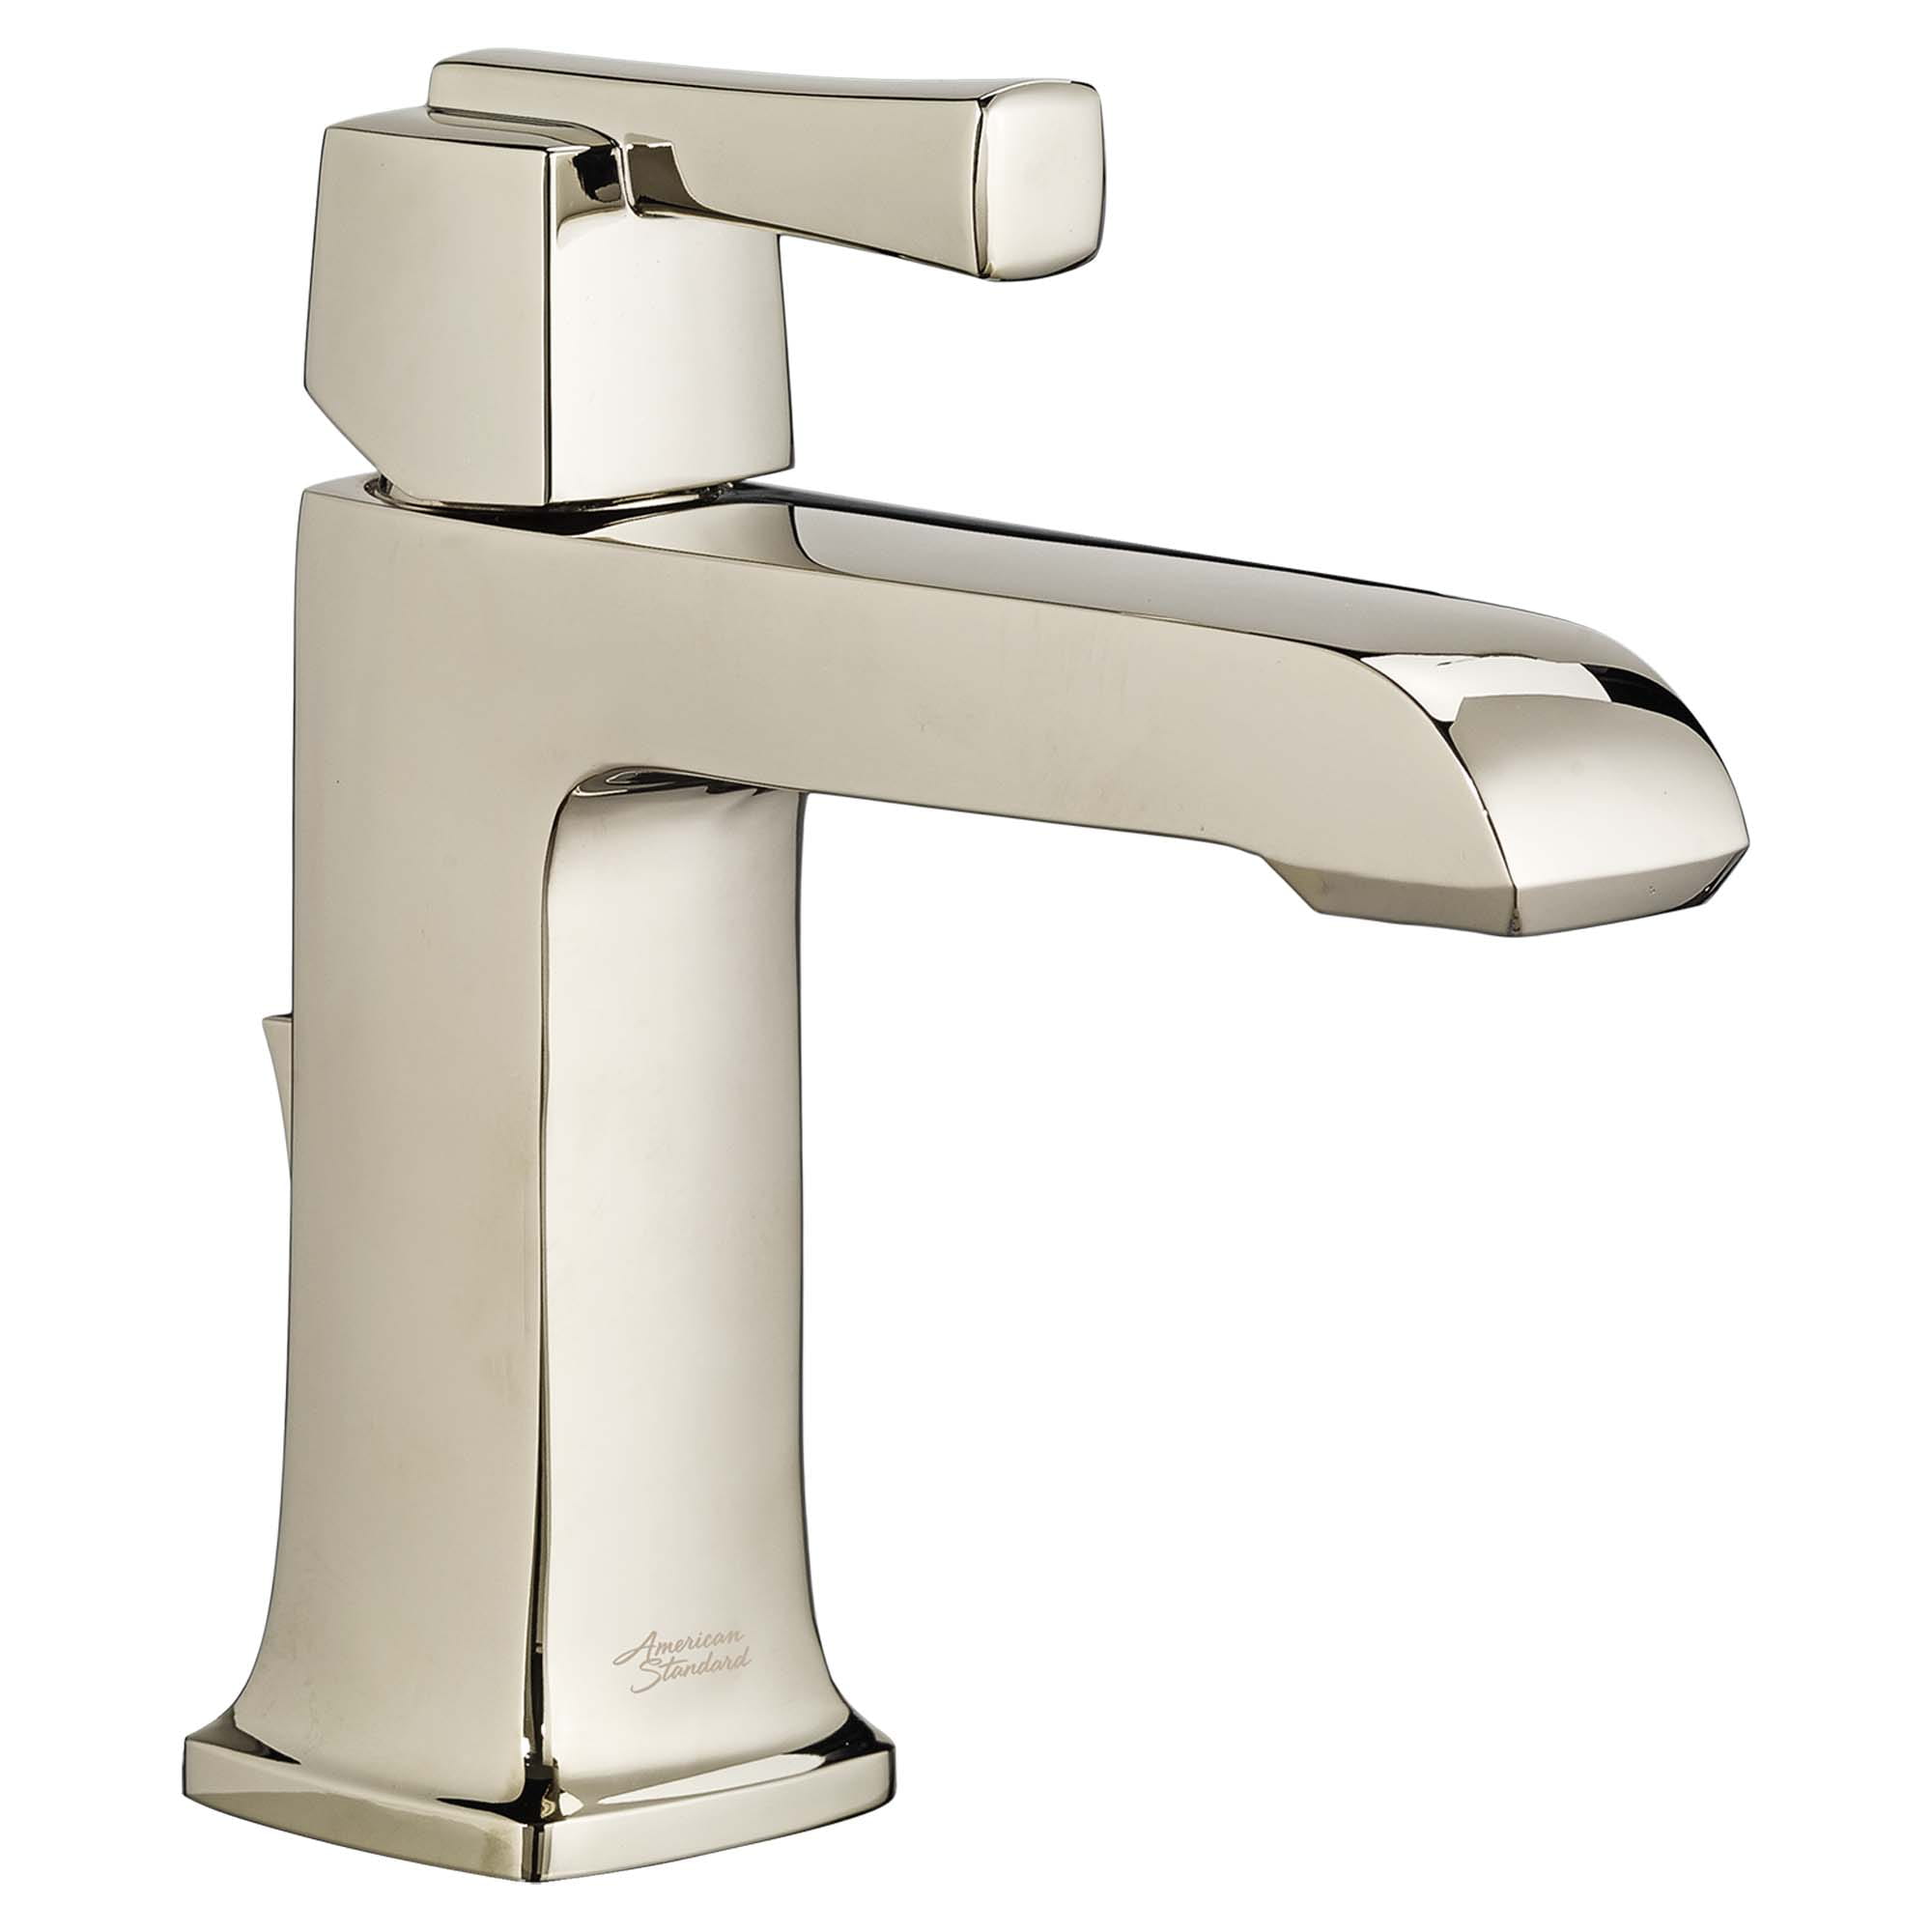 Townsend® Single Hole Single-Handle Bathroom Faucet 1.2 gpm/4.5 L/min With Lever Handle